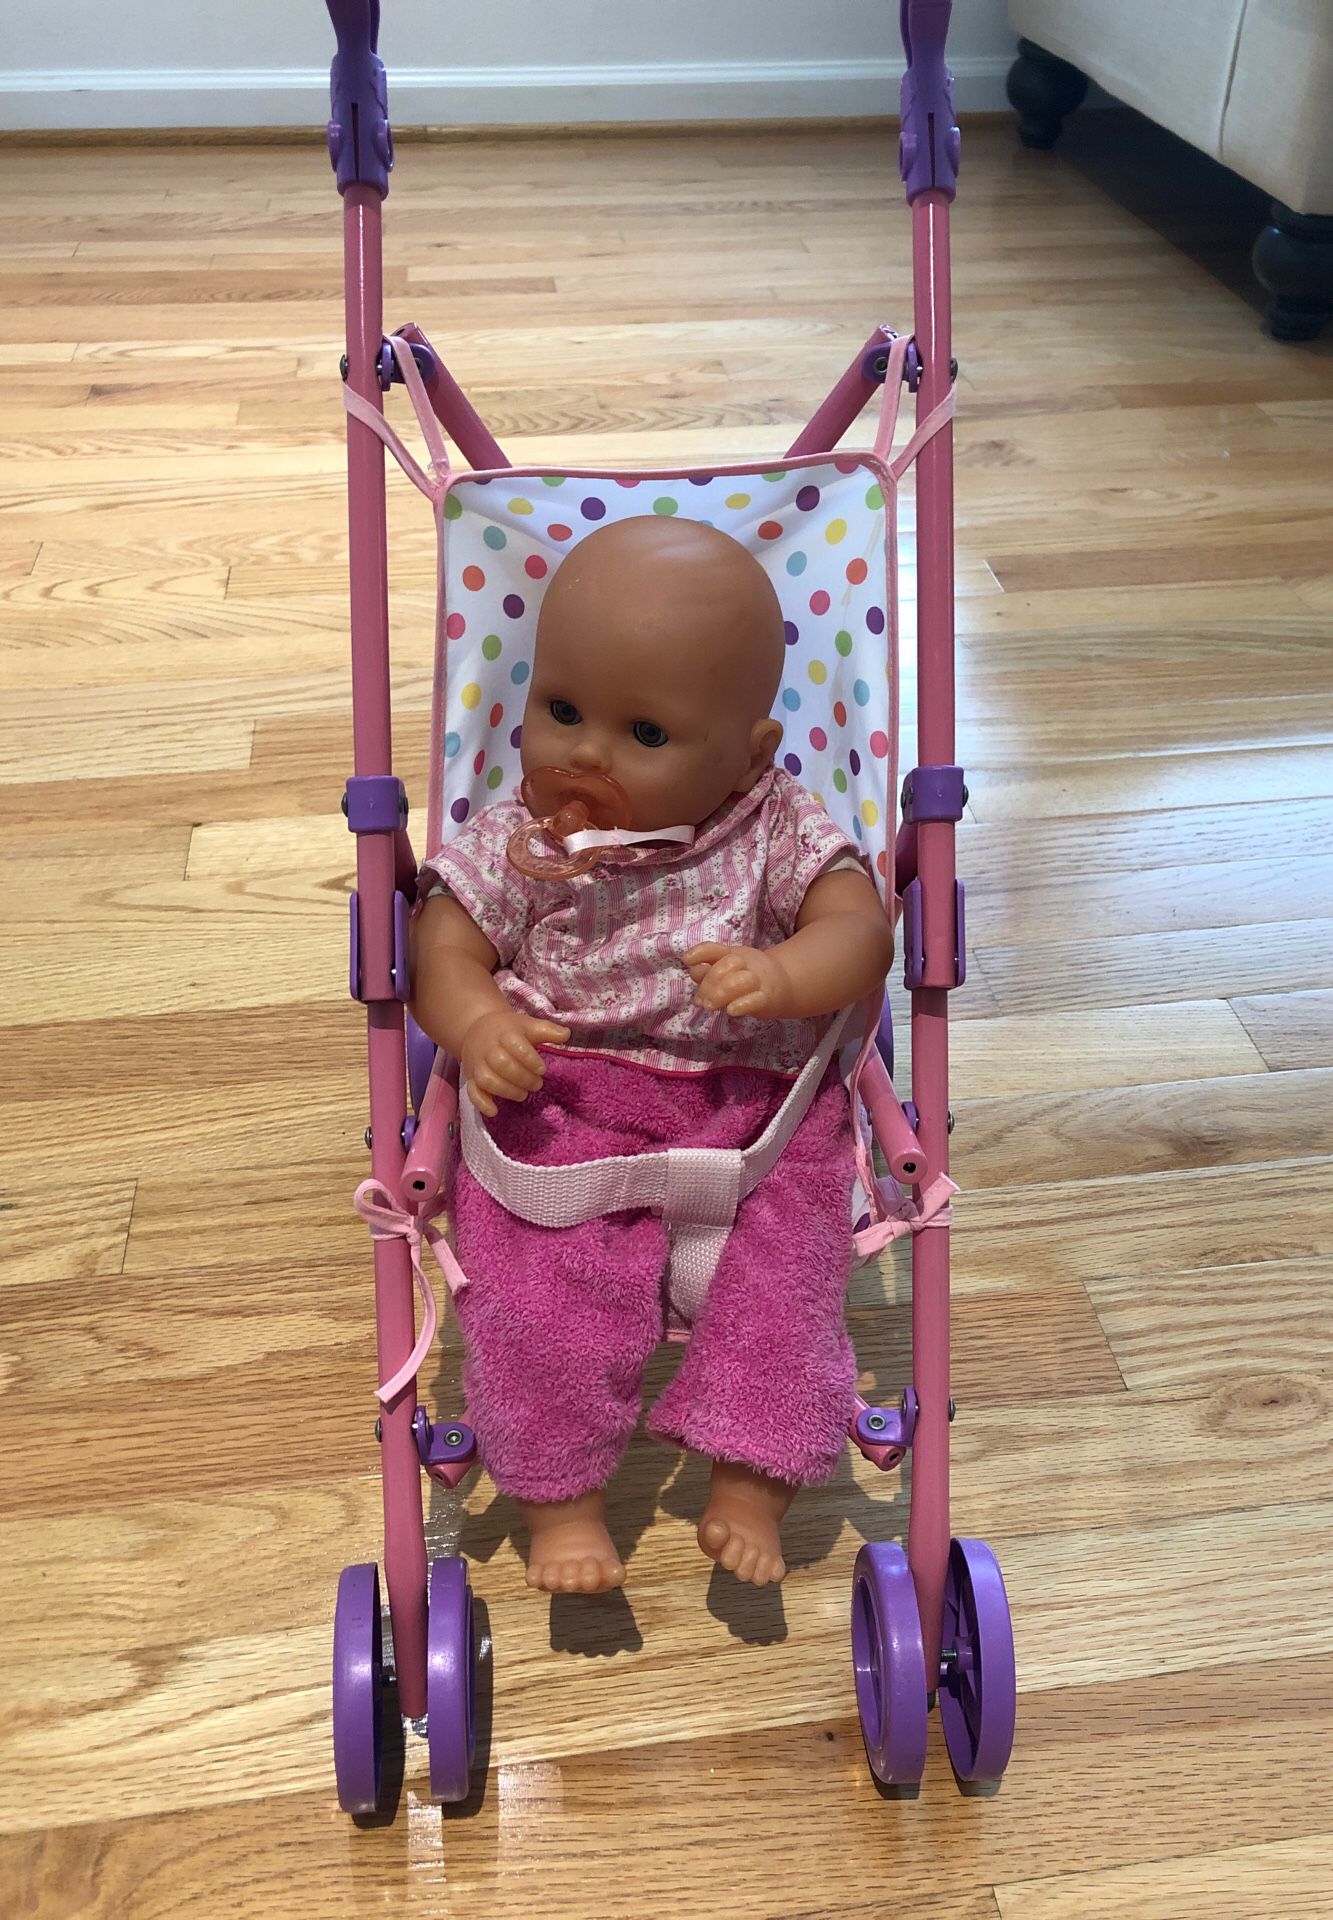 Doll and foldable stroller set